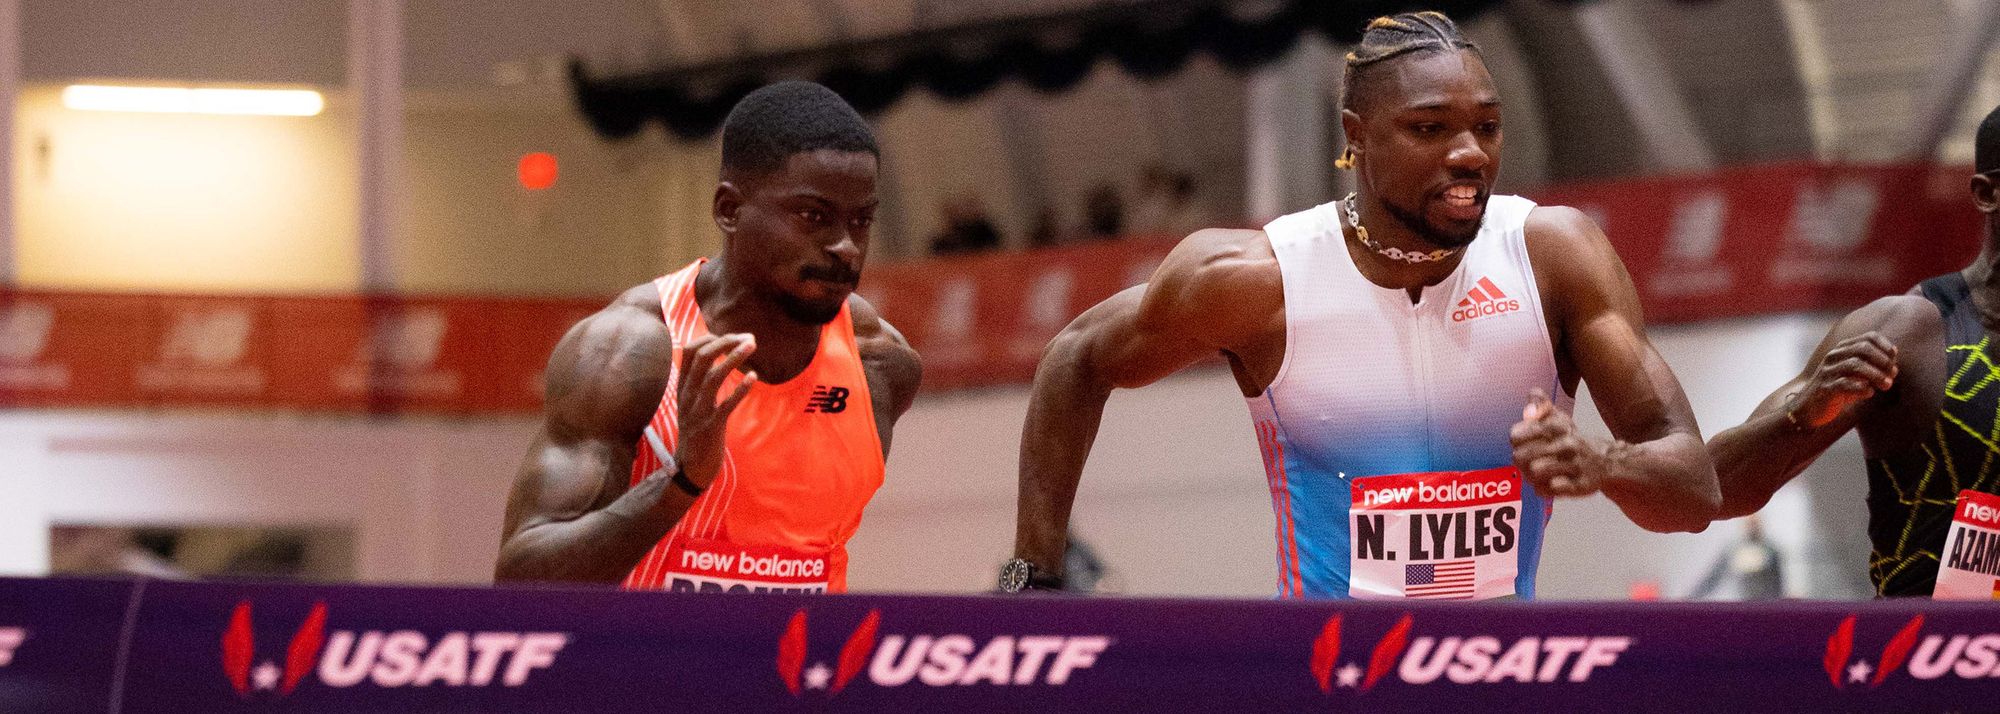 Top performances across the board at this season’s second World Athletics Indoor Tour Gold meeting